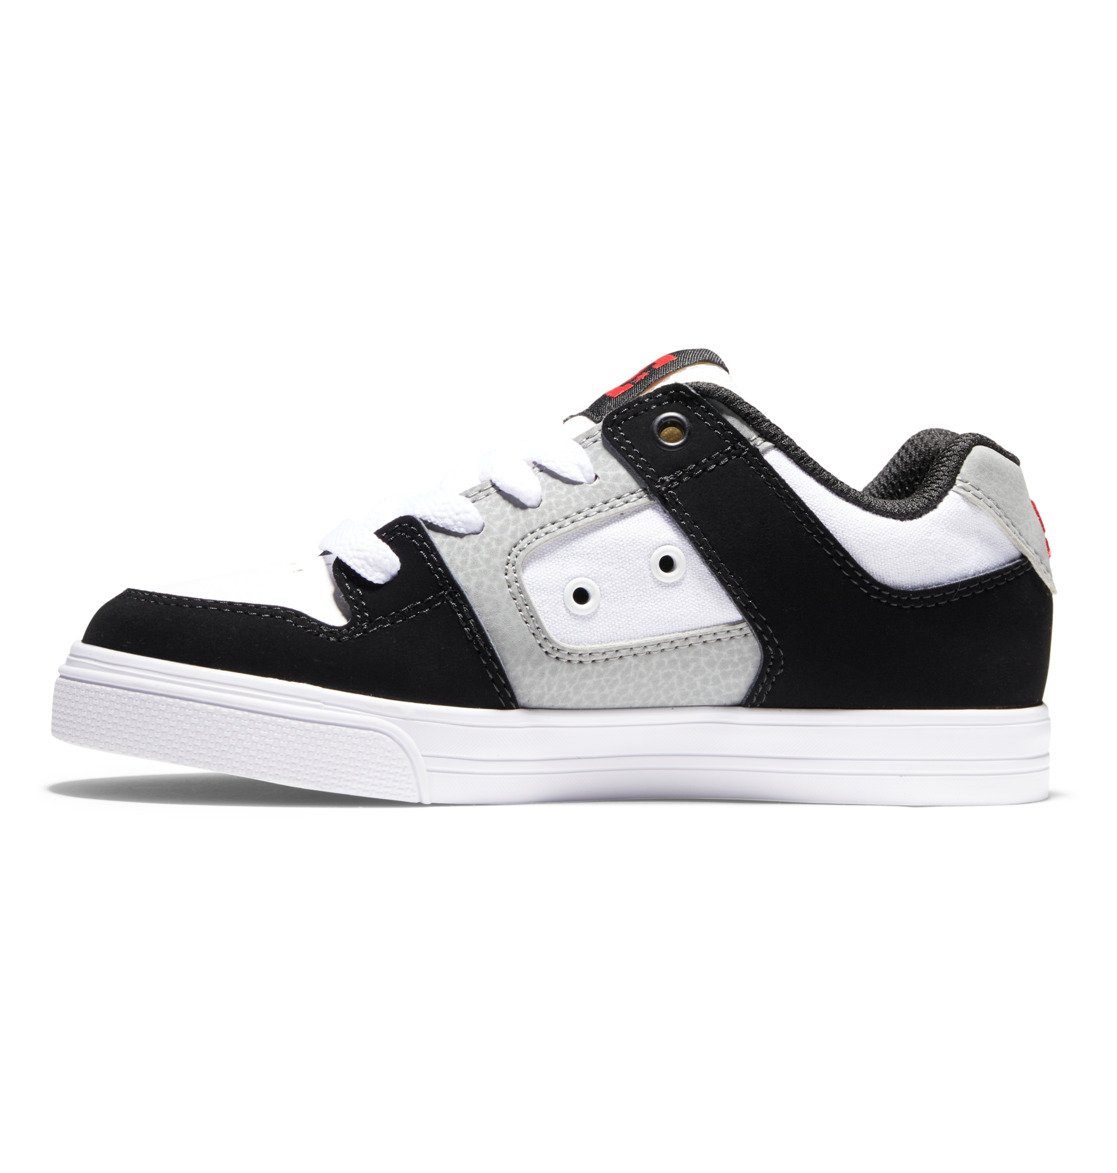 DC Shoes Pure Sneaker White/Black/Red